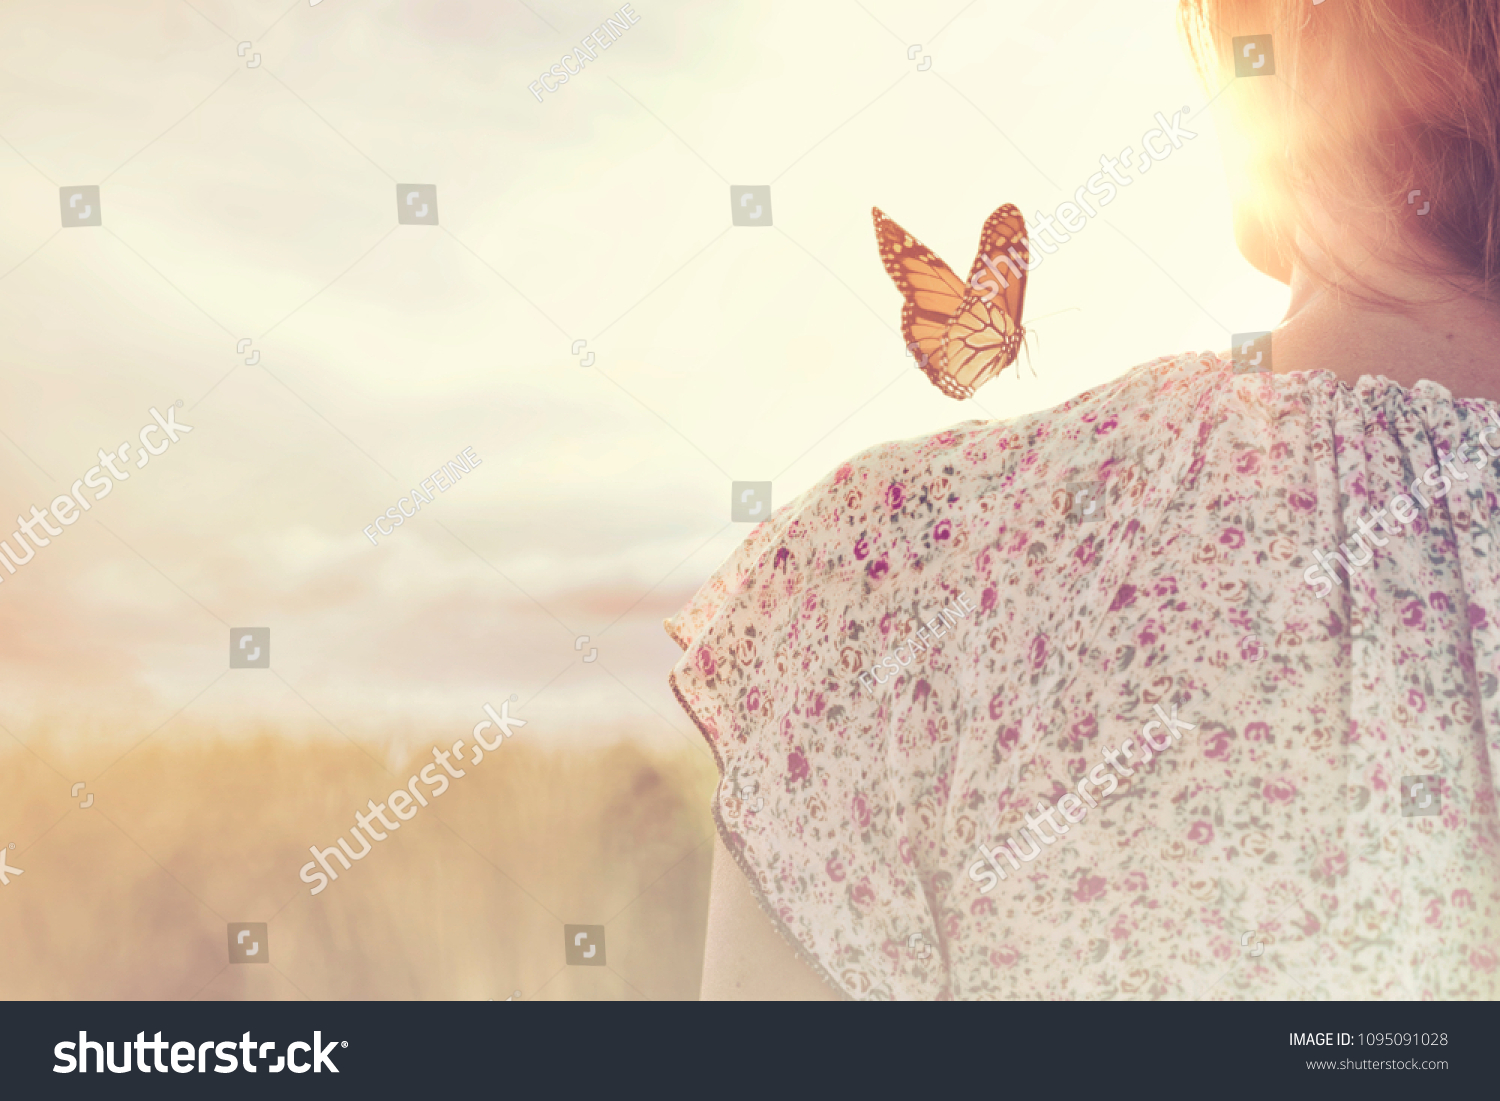 special moment of meeting between a butterfly and a girl in the middle of nature #1095091028